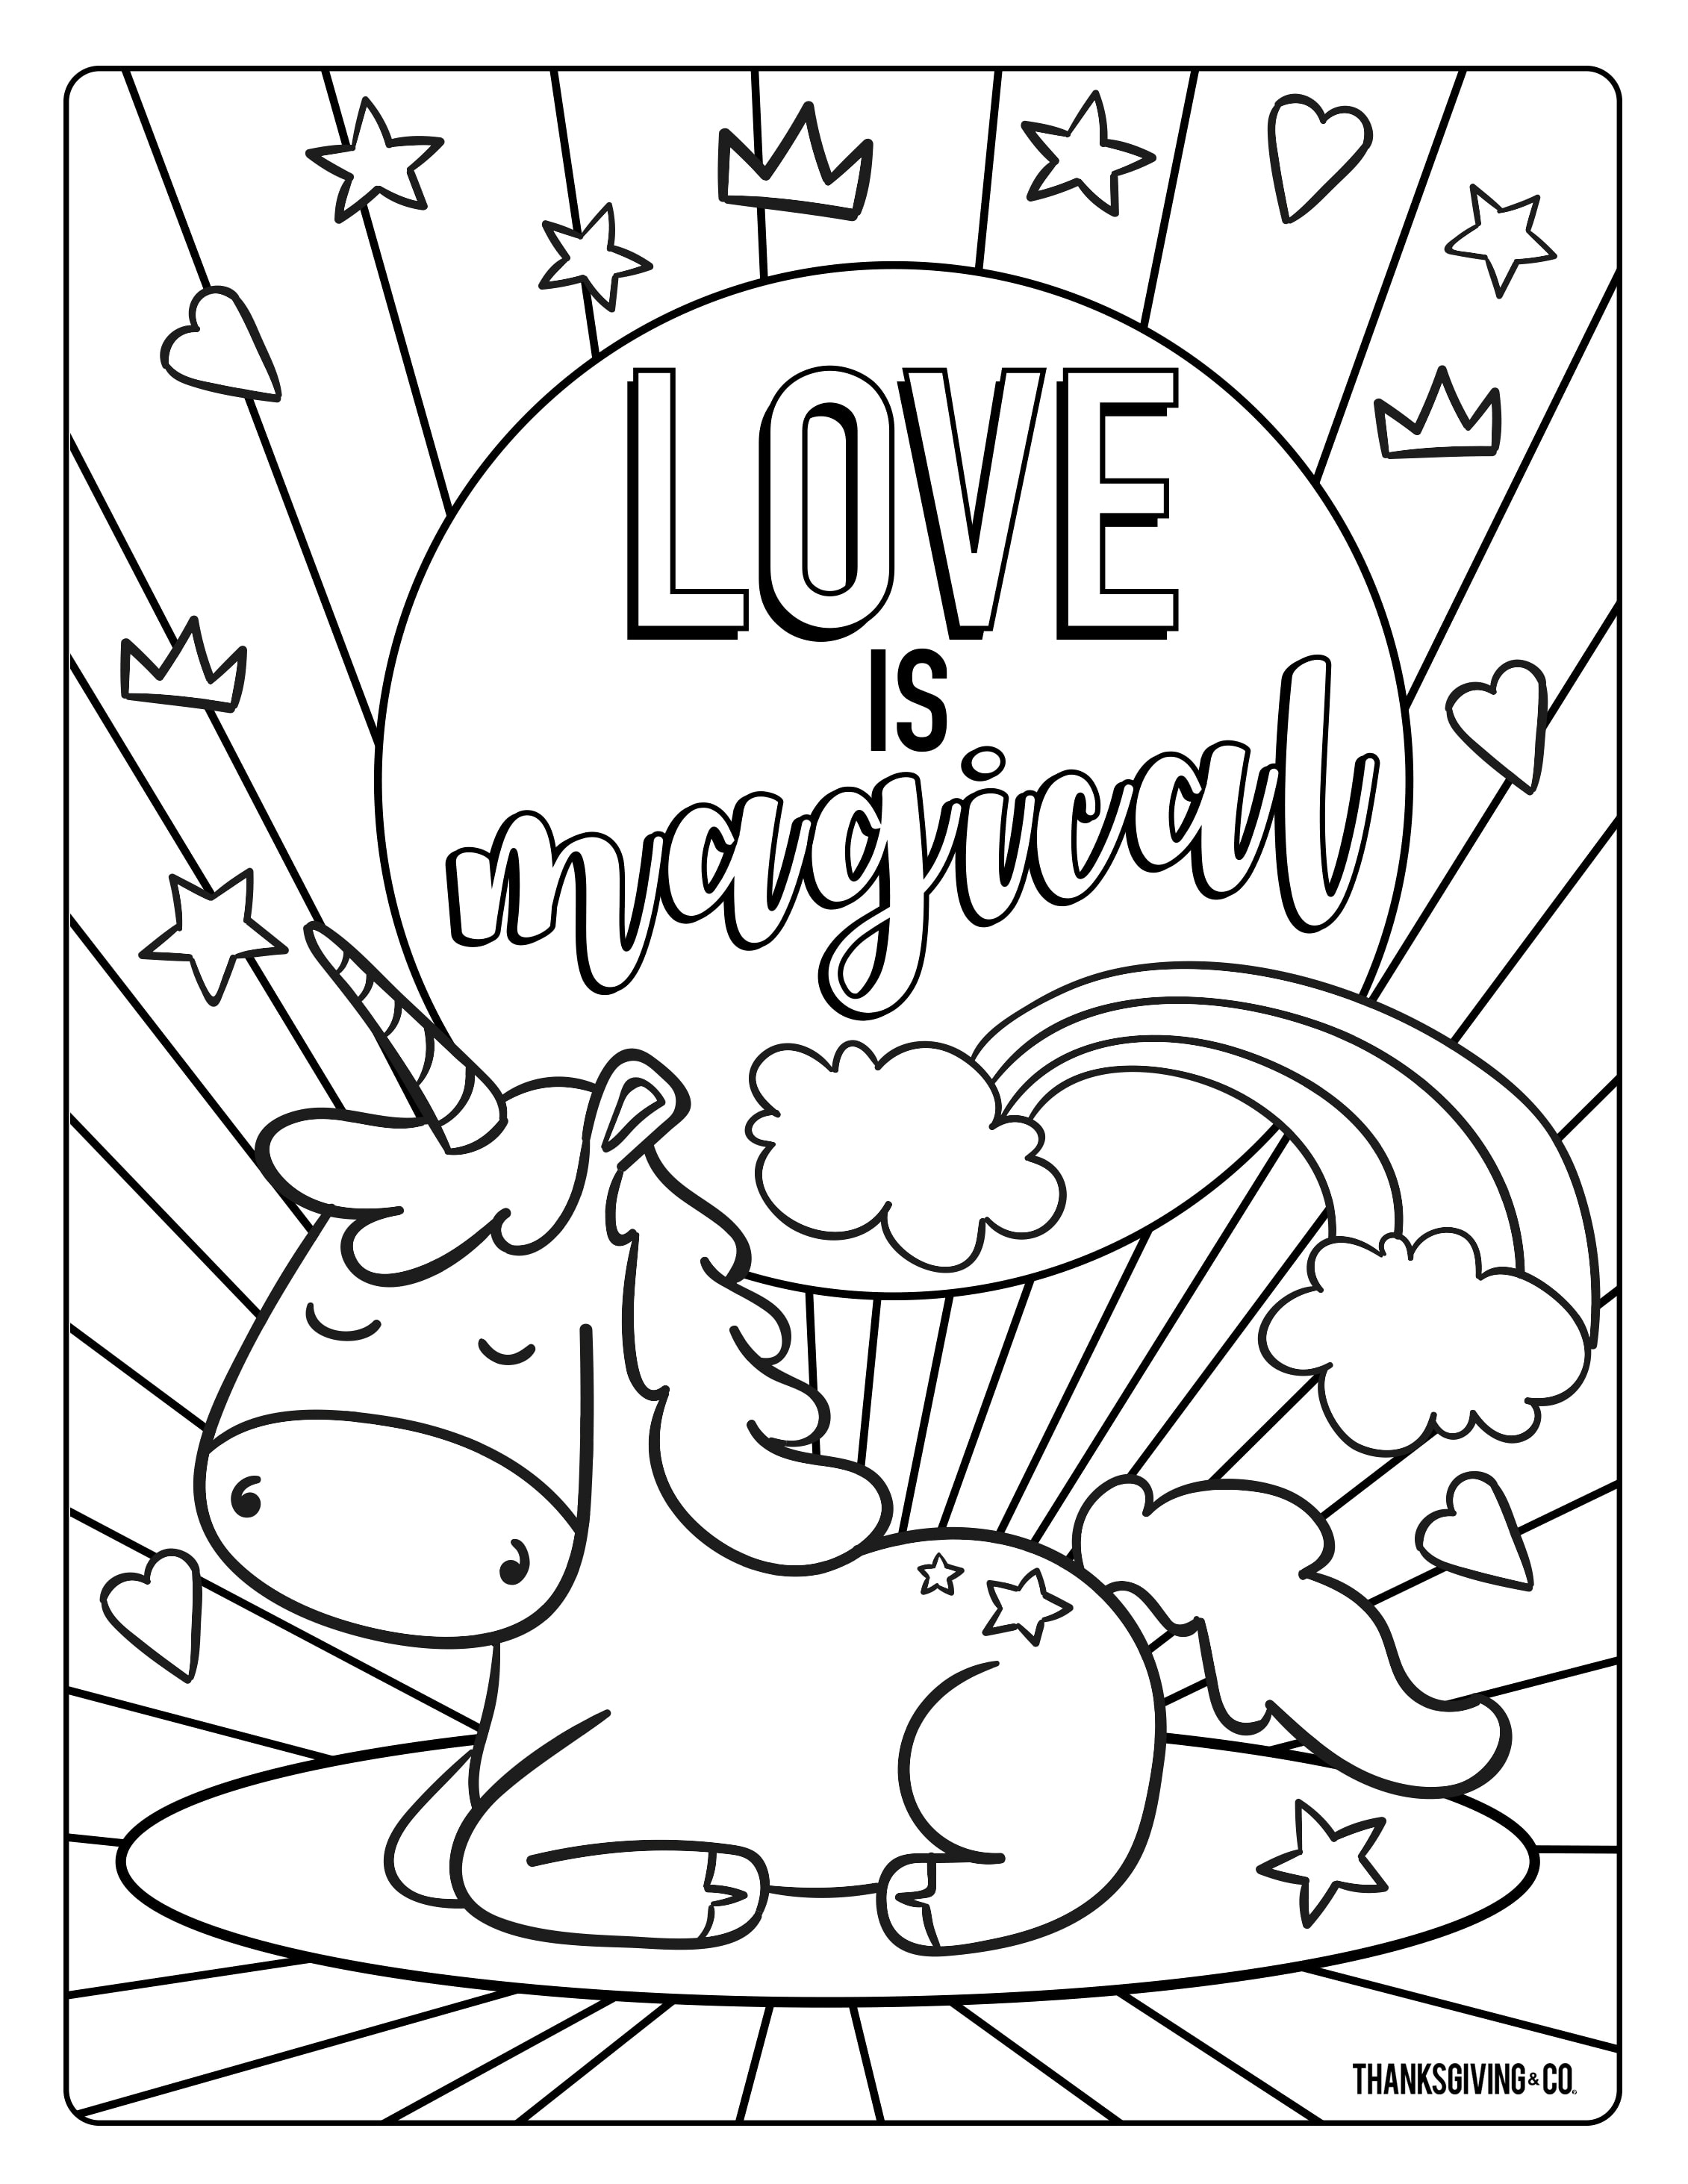 4 Free Valentine S Day Coloring Pages For Kids